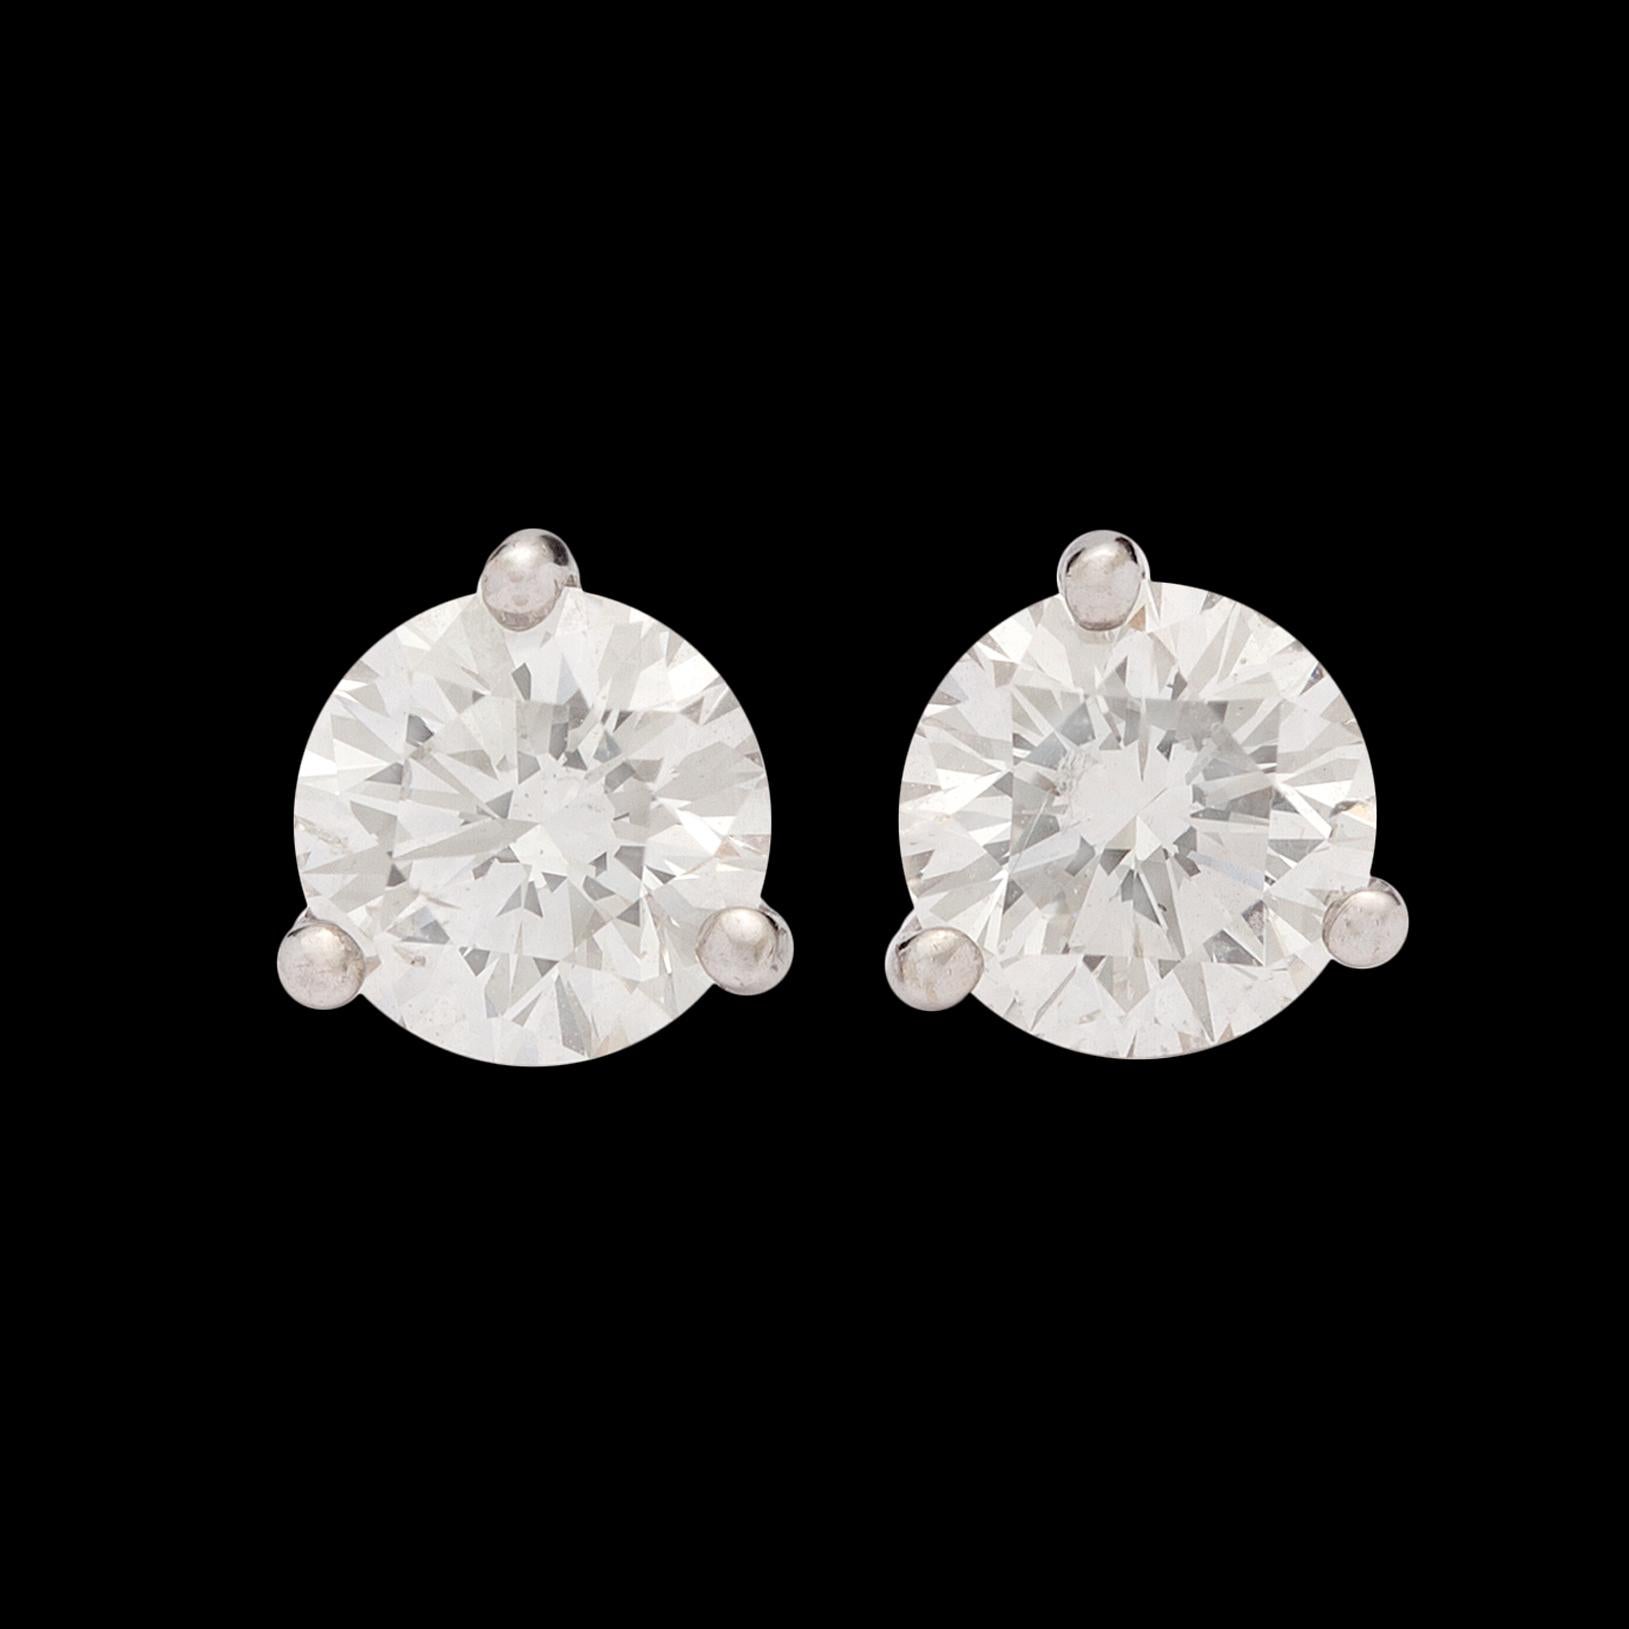 Two diamonds full of sparkle and fire come together to make one fantastic pair of stud earrings. Featuring EGL certificates that grade the stones as I color with VS1 and VS2 clarity, this exceptionally well matched pair weighs in at an impressive